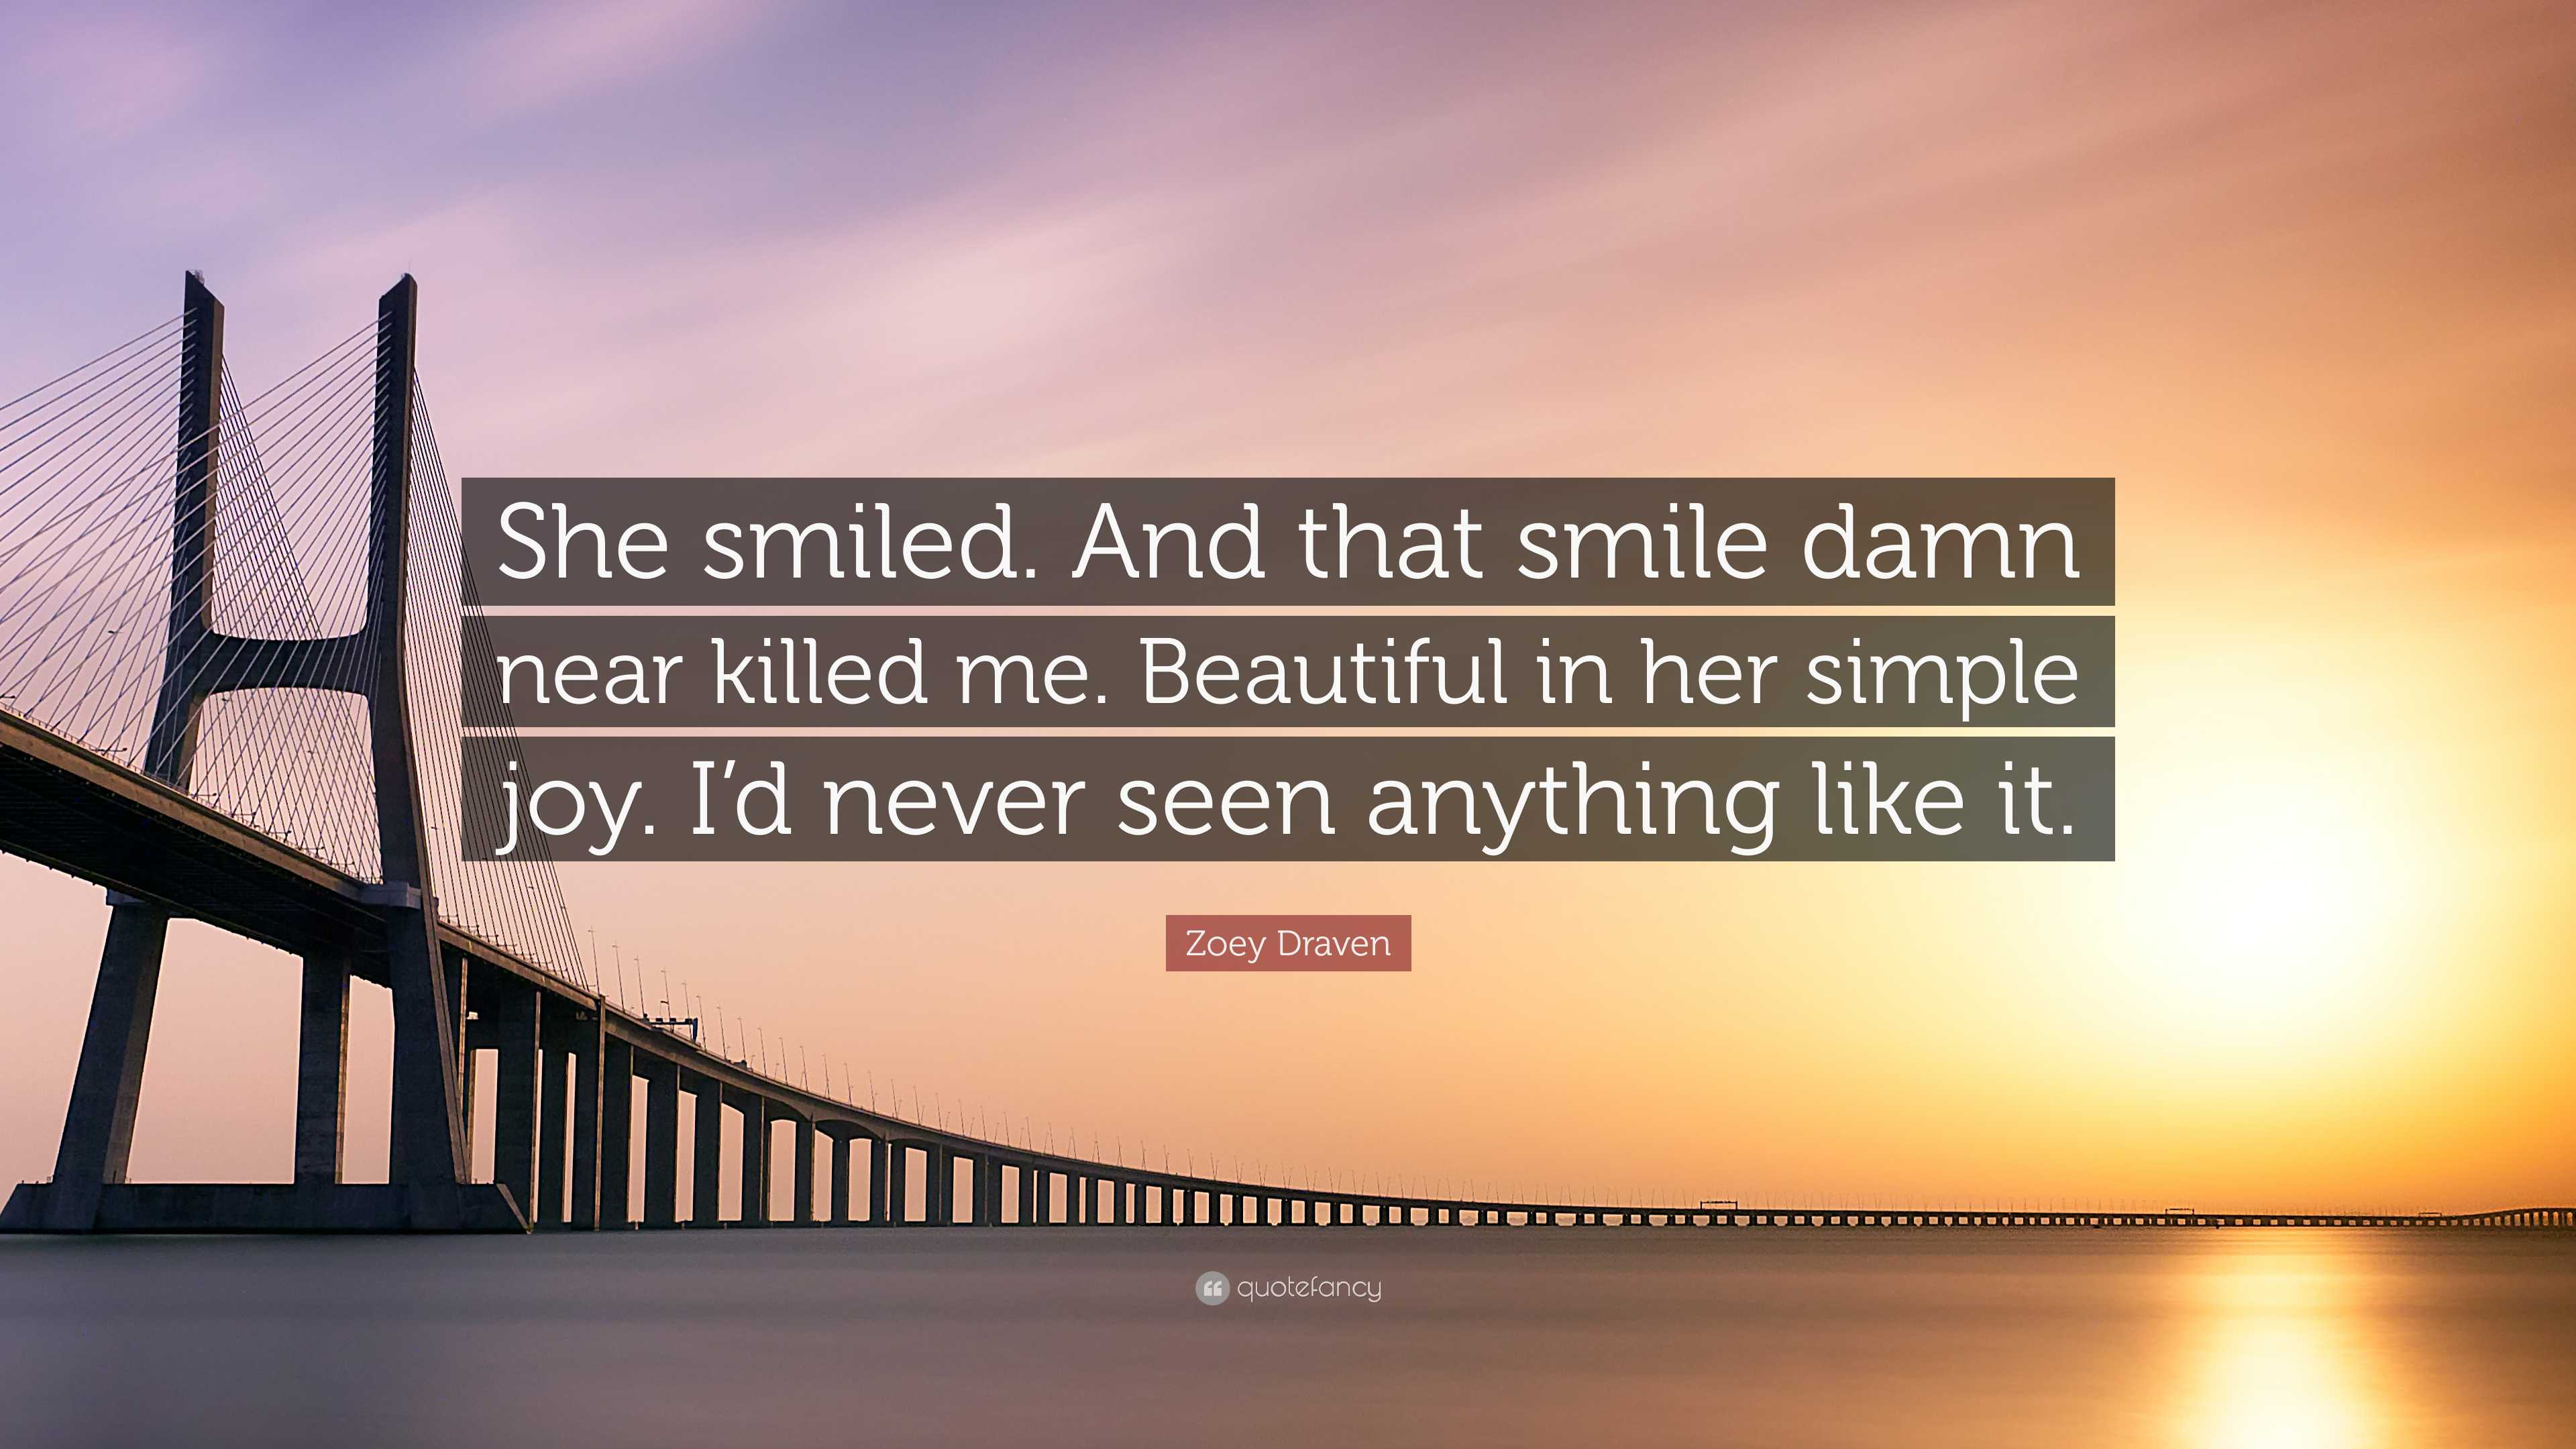 Zoey Draven Quote: “She smiled. And that smile damn near killed me